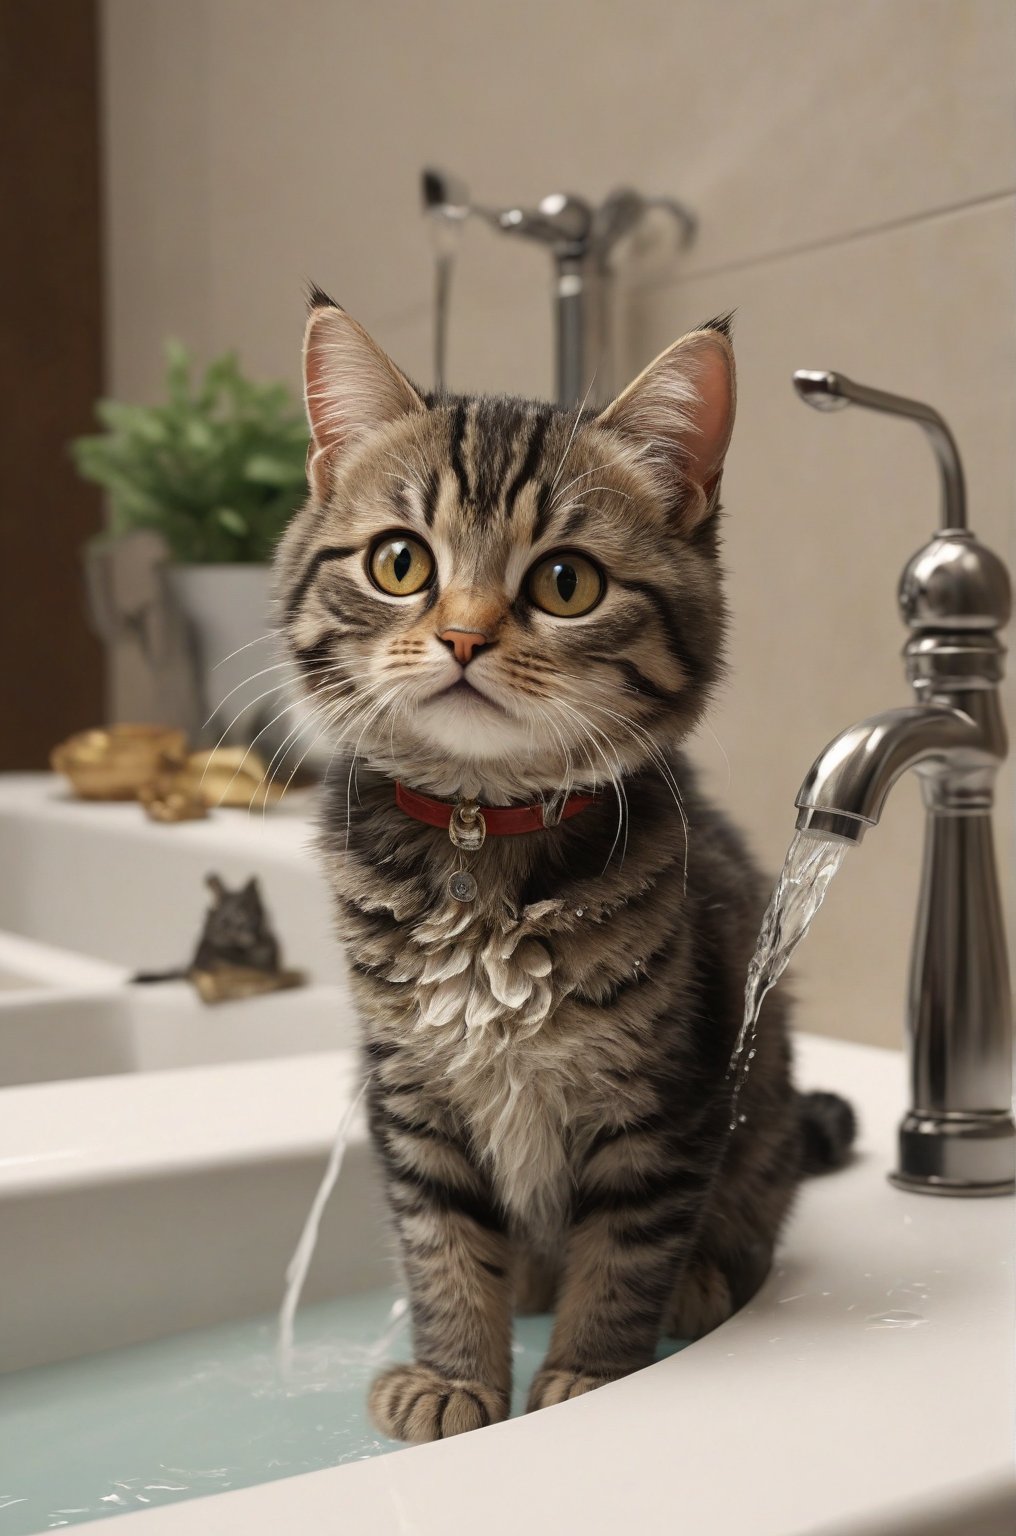 Extremely realistic, high-definition, super detailed,real cat, little cat,A real cute cat, A cat turned on the faucet and what came out was 1 million dollars, making him rich